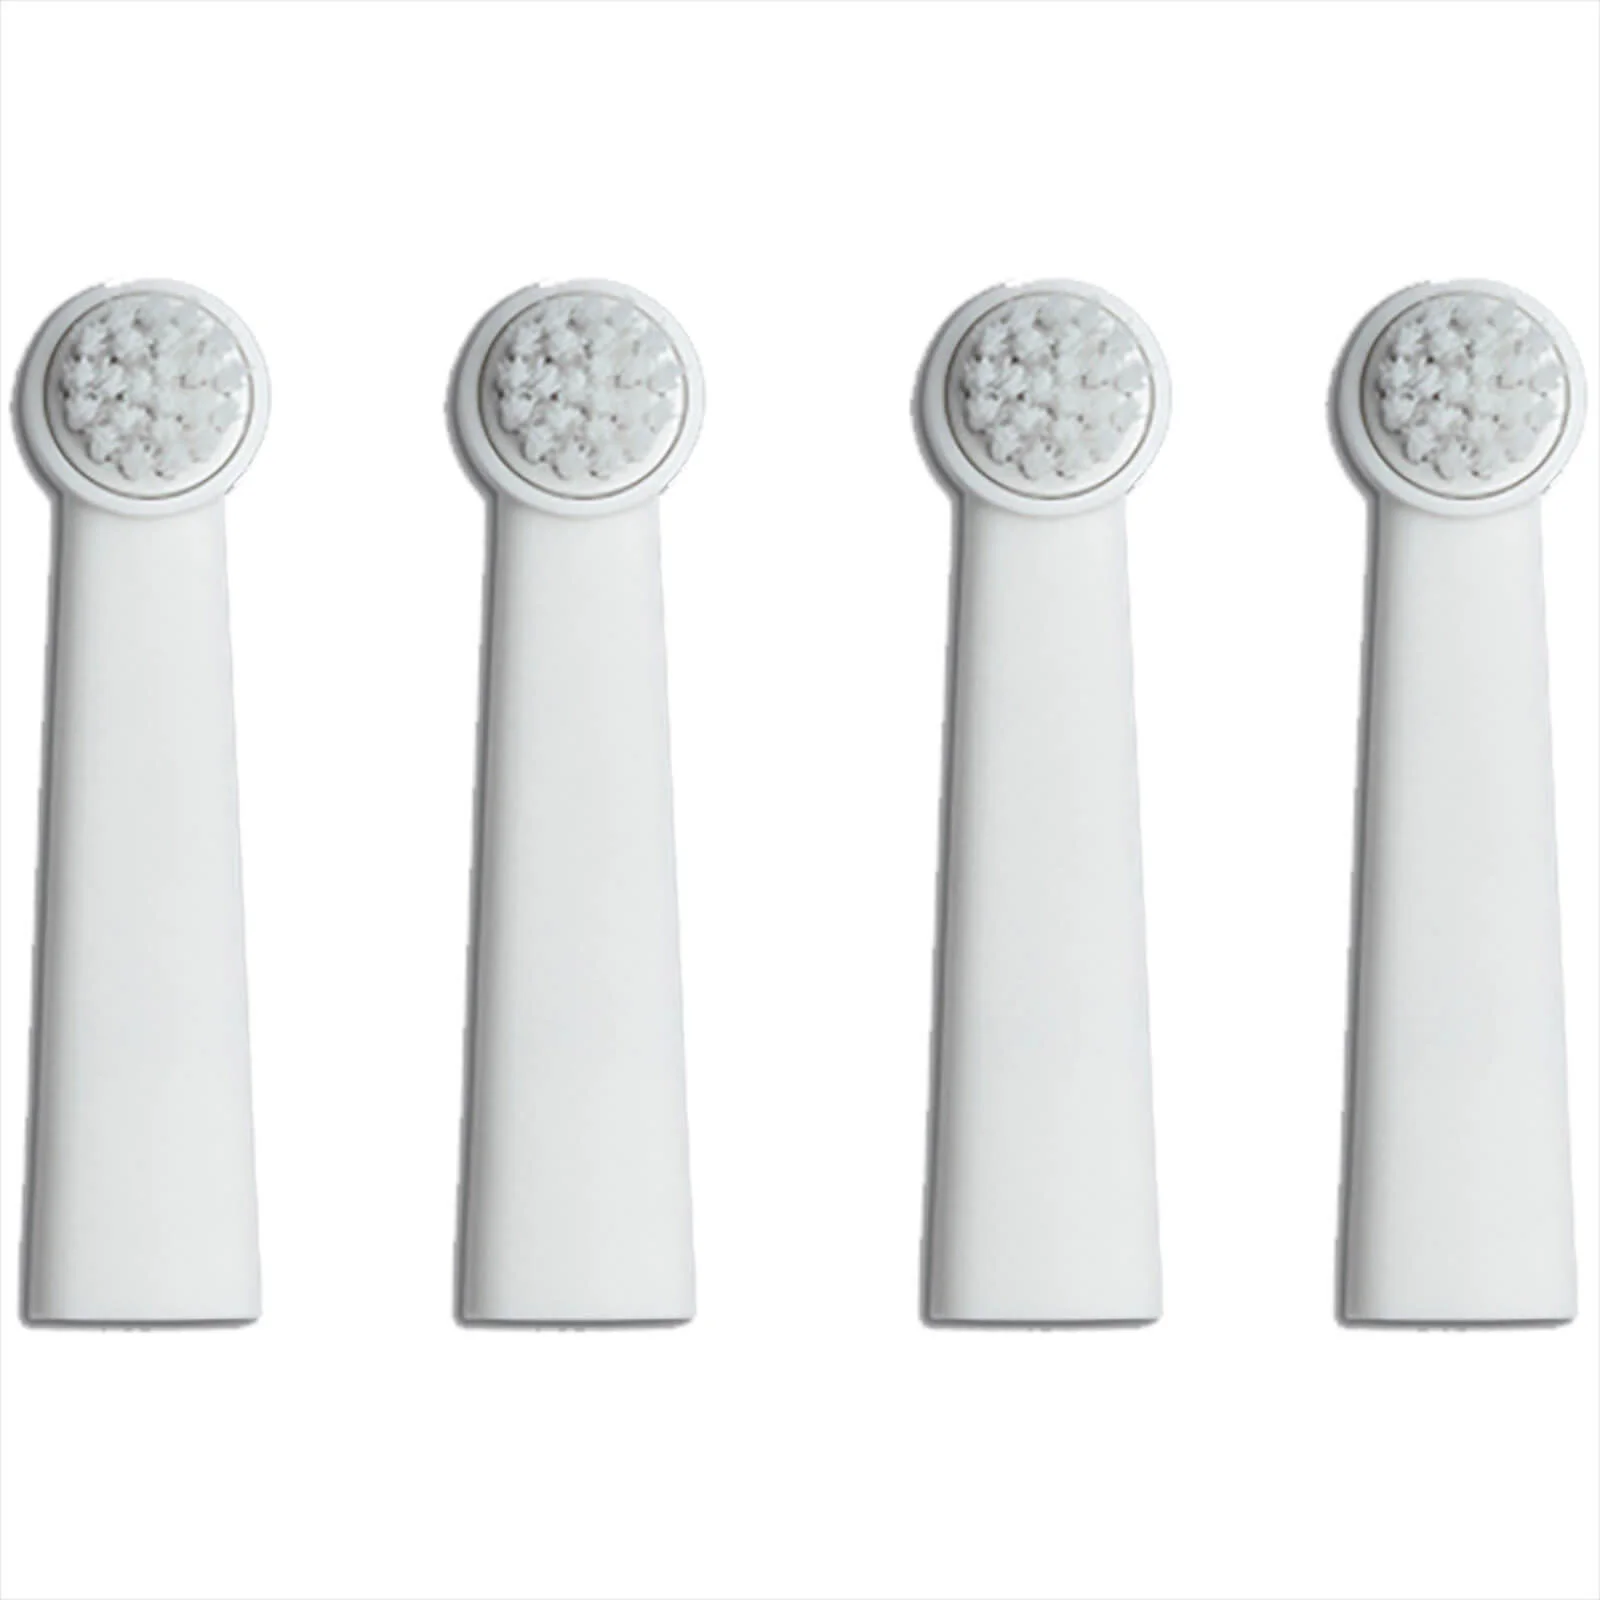 Bruzzoni 1220 4p Brush Heads - White (The Wall Street Collection) Image 1